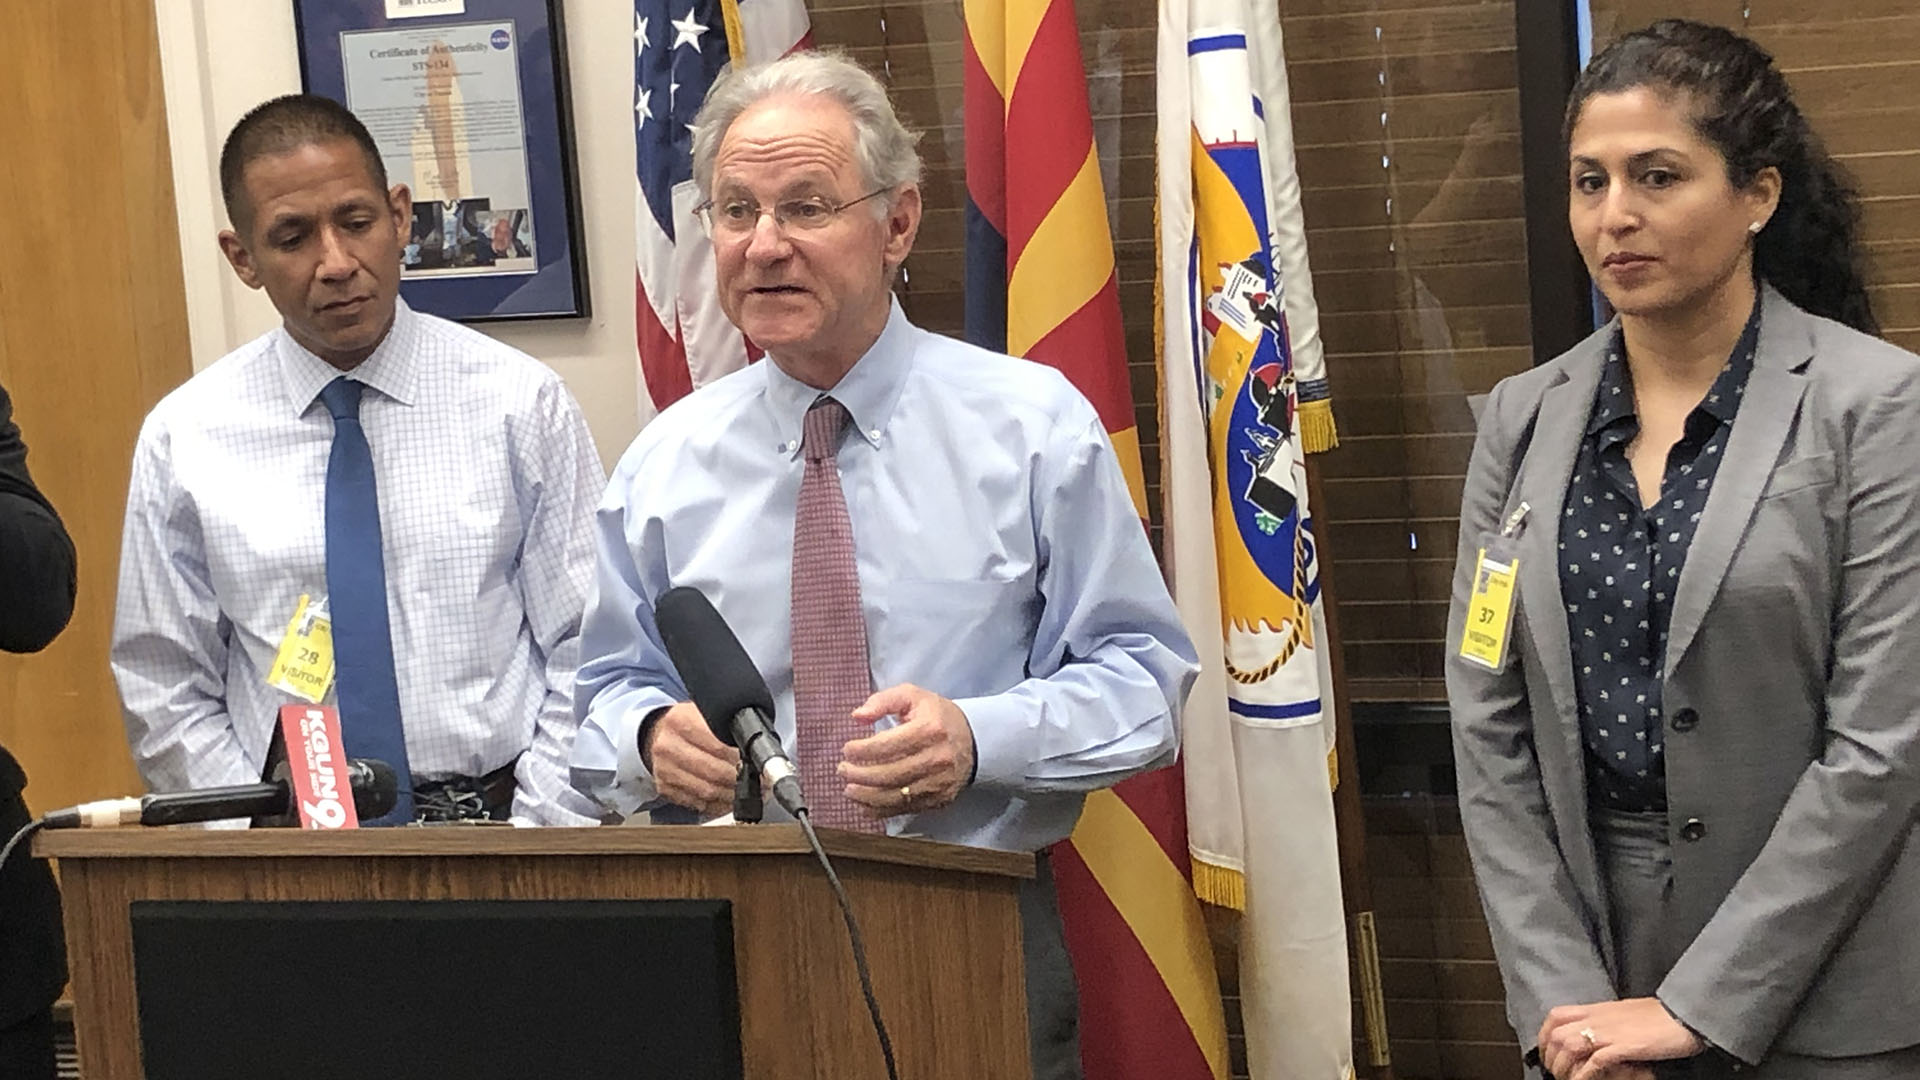 Tucson Mayor Jonathan Rothschild speaks to the media about efforts to re-engage students who leave school, April 12, 2019.